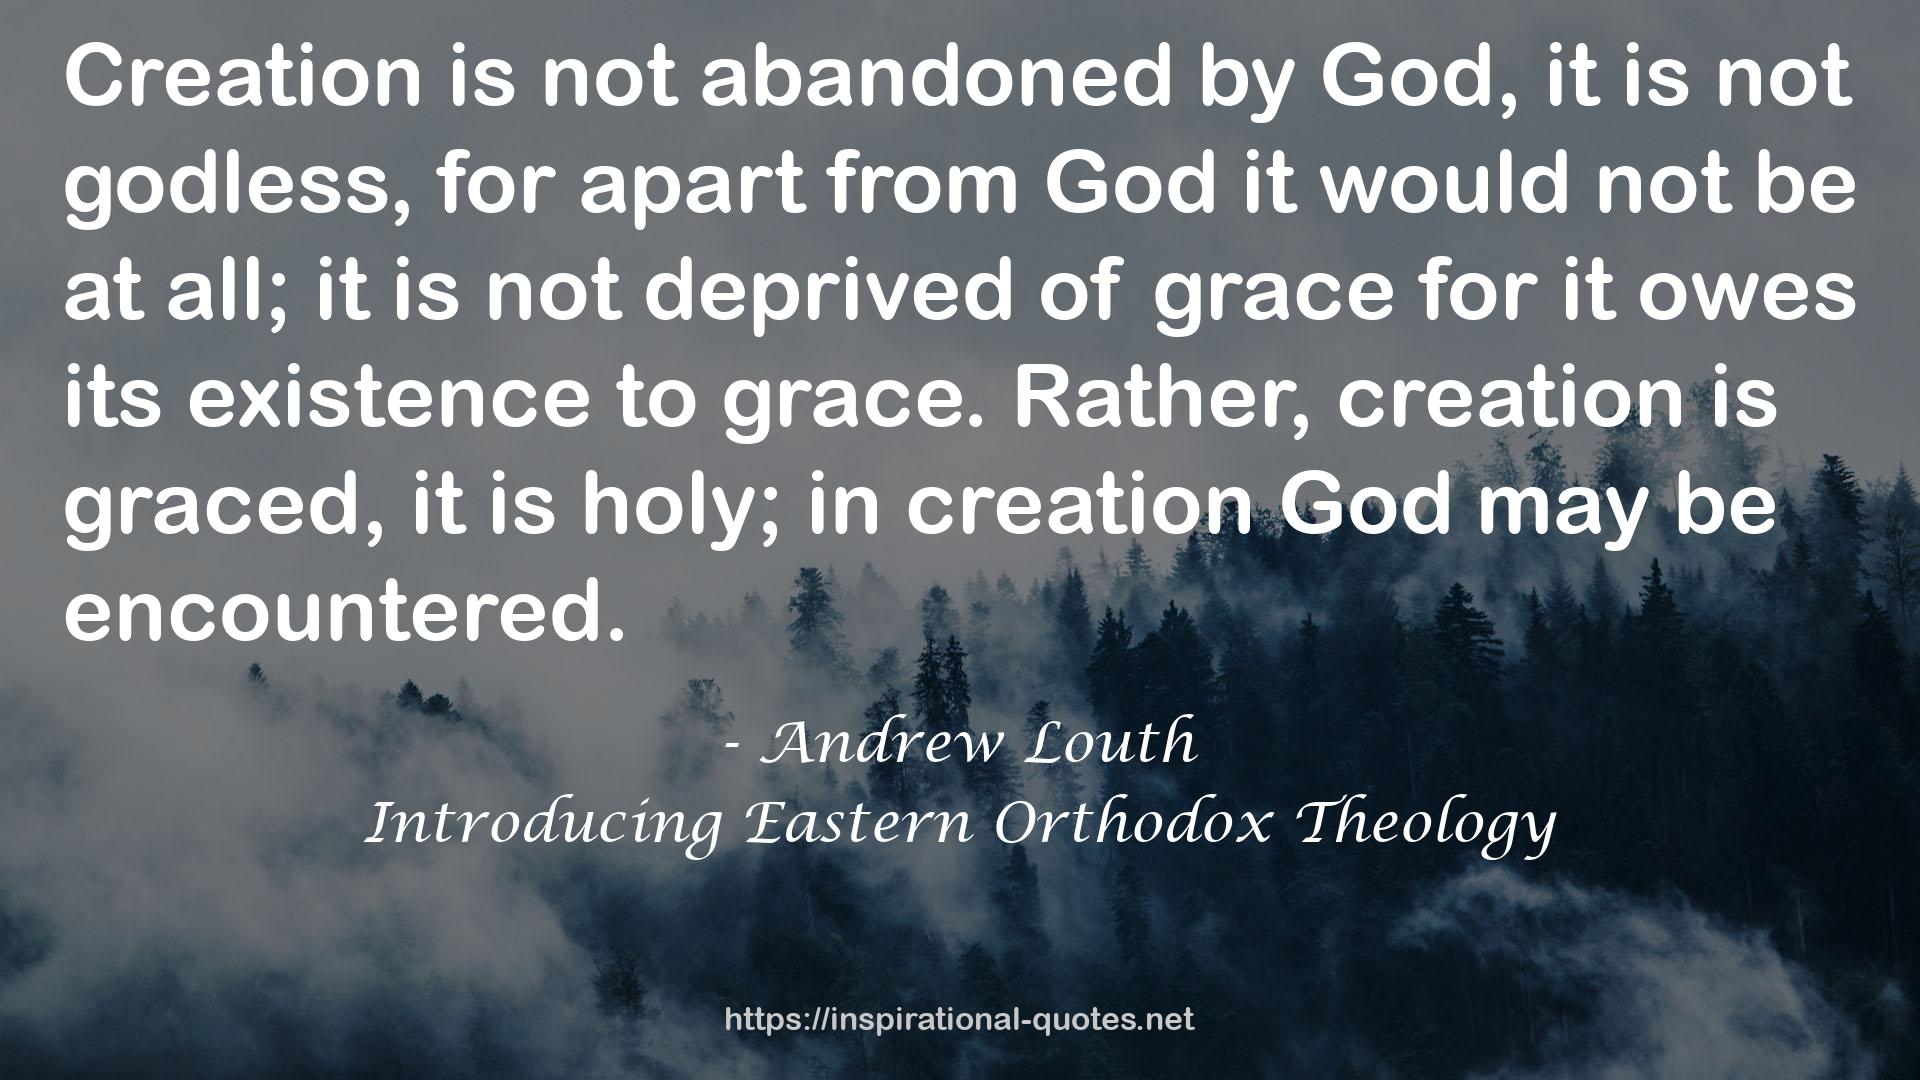 Introducing Eastern Orthodox Theology QUOTES